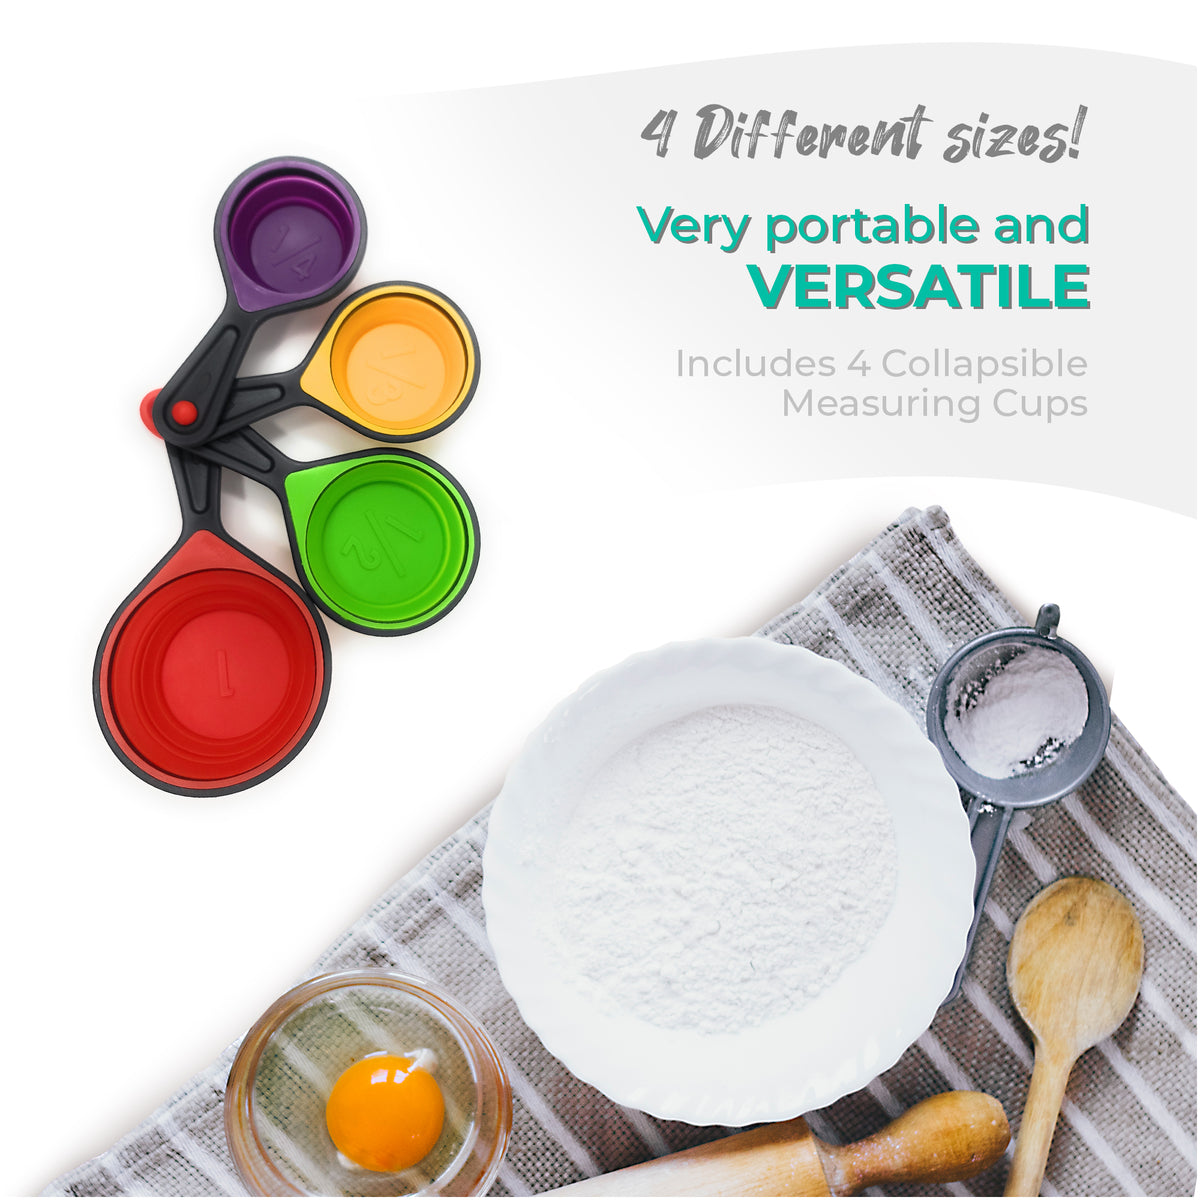 Collapsible Silicone Measuring Cups & Measuring Spoons - set 8psc Silicone  Mesuring Cup and Collapsible Spoon - Great for Camping and Pet Food (Green)